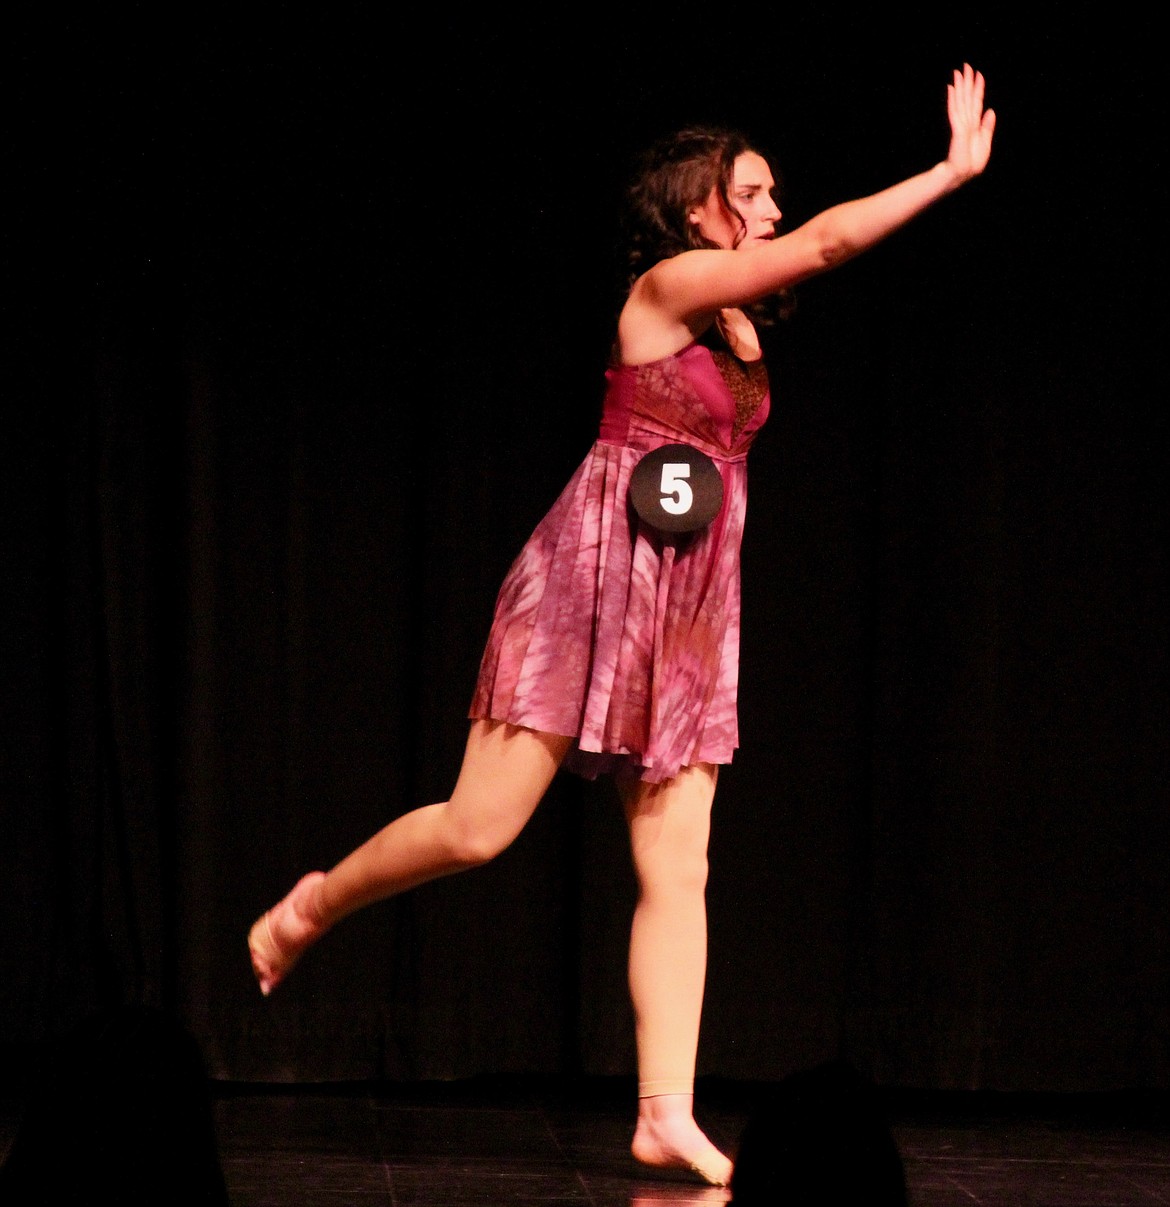 Mia Blackmore performs a lyrical dance for the talent portion of the DYW 2022 program.